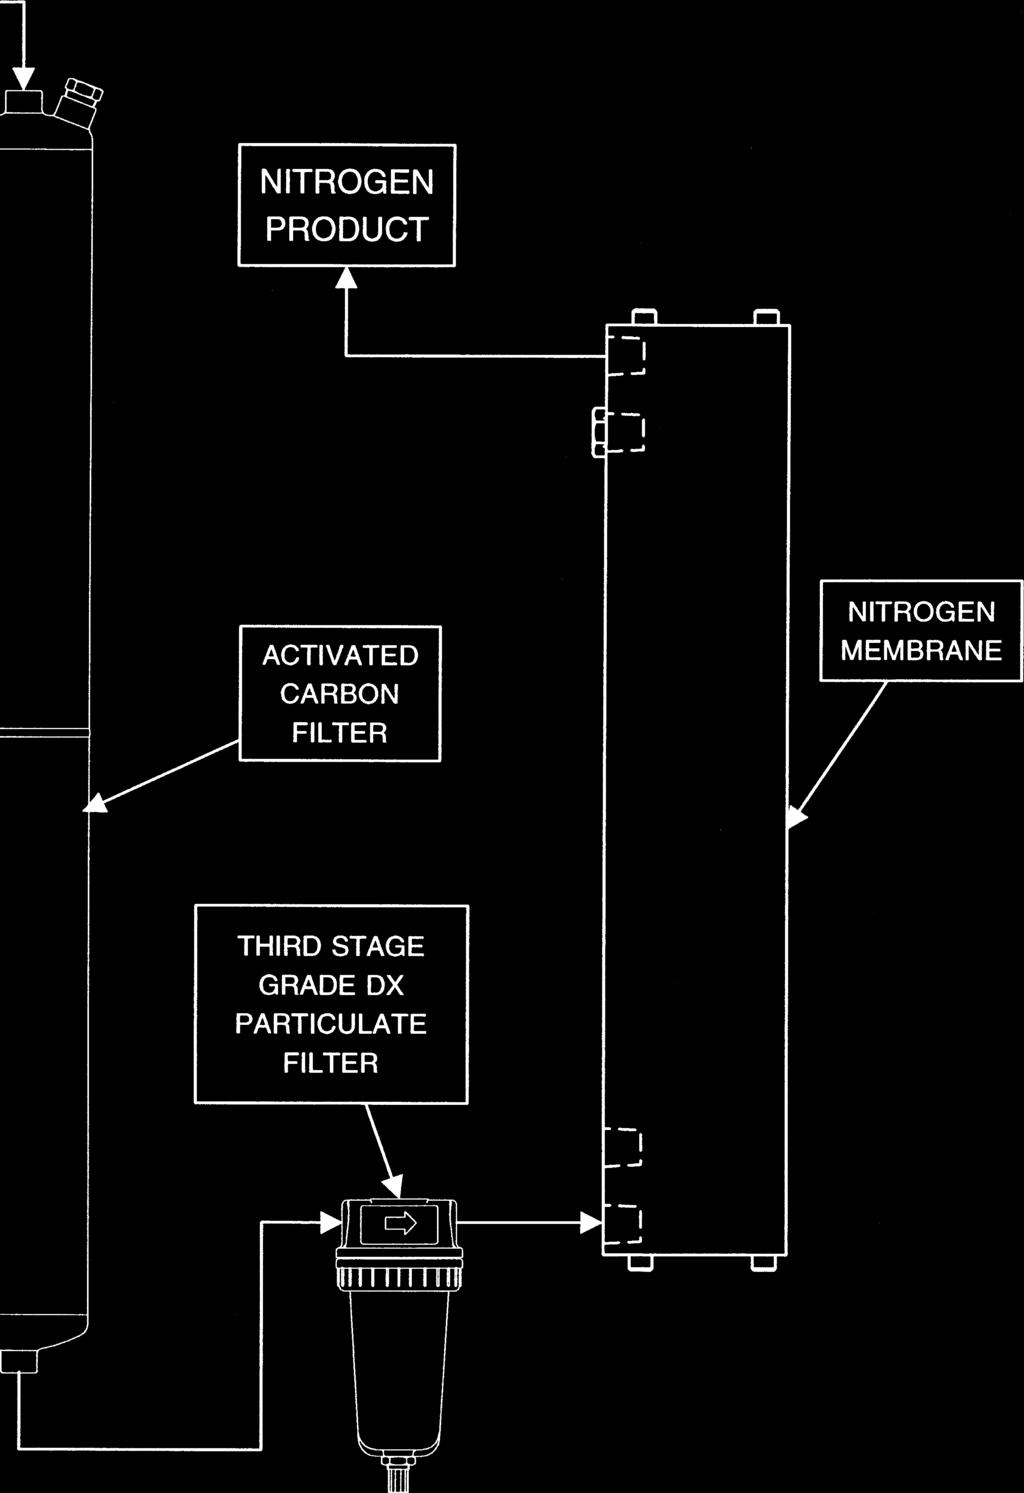 Sources of compressed air Plant air: The distribution of compressed air from a central generation point, usually a utility room.